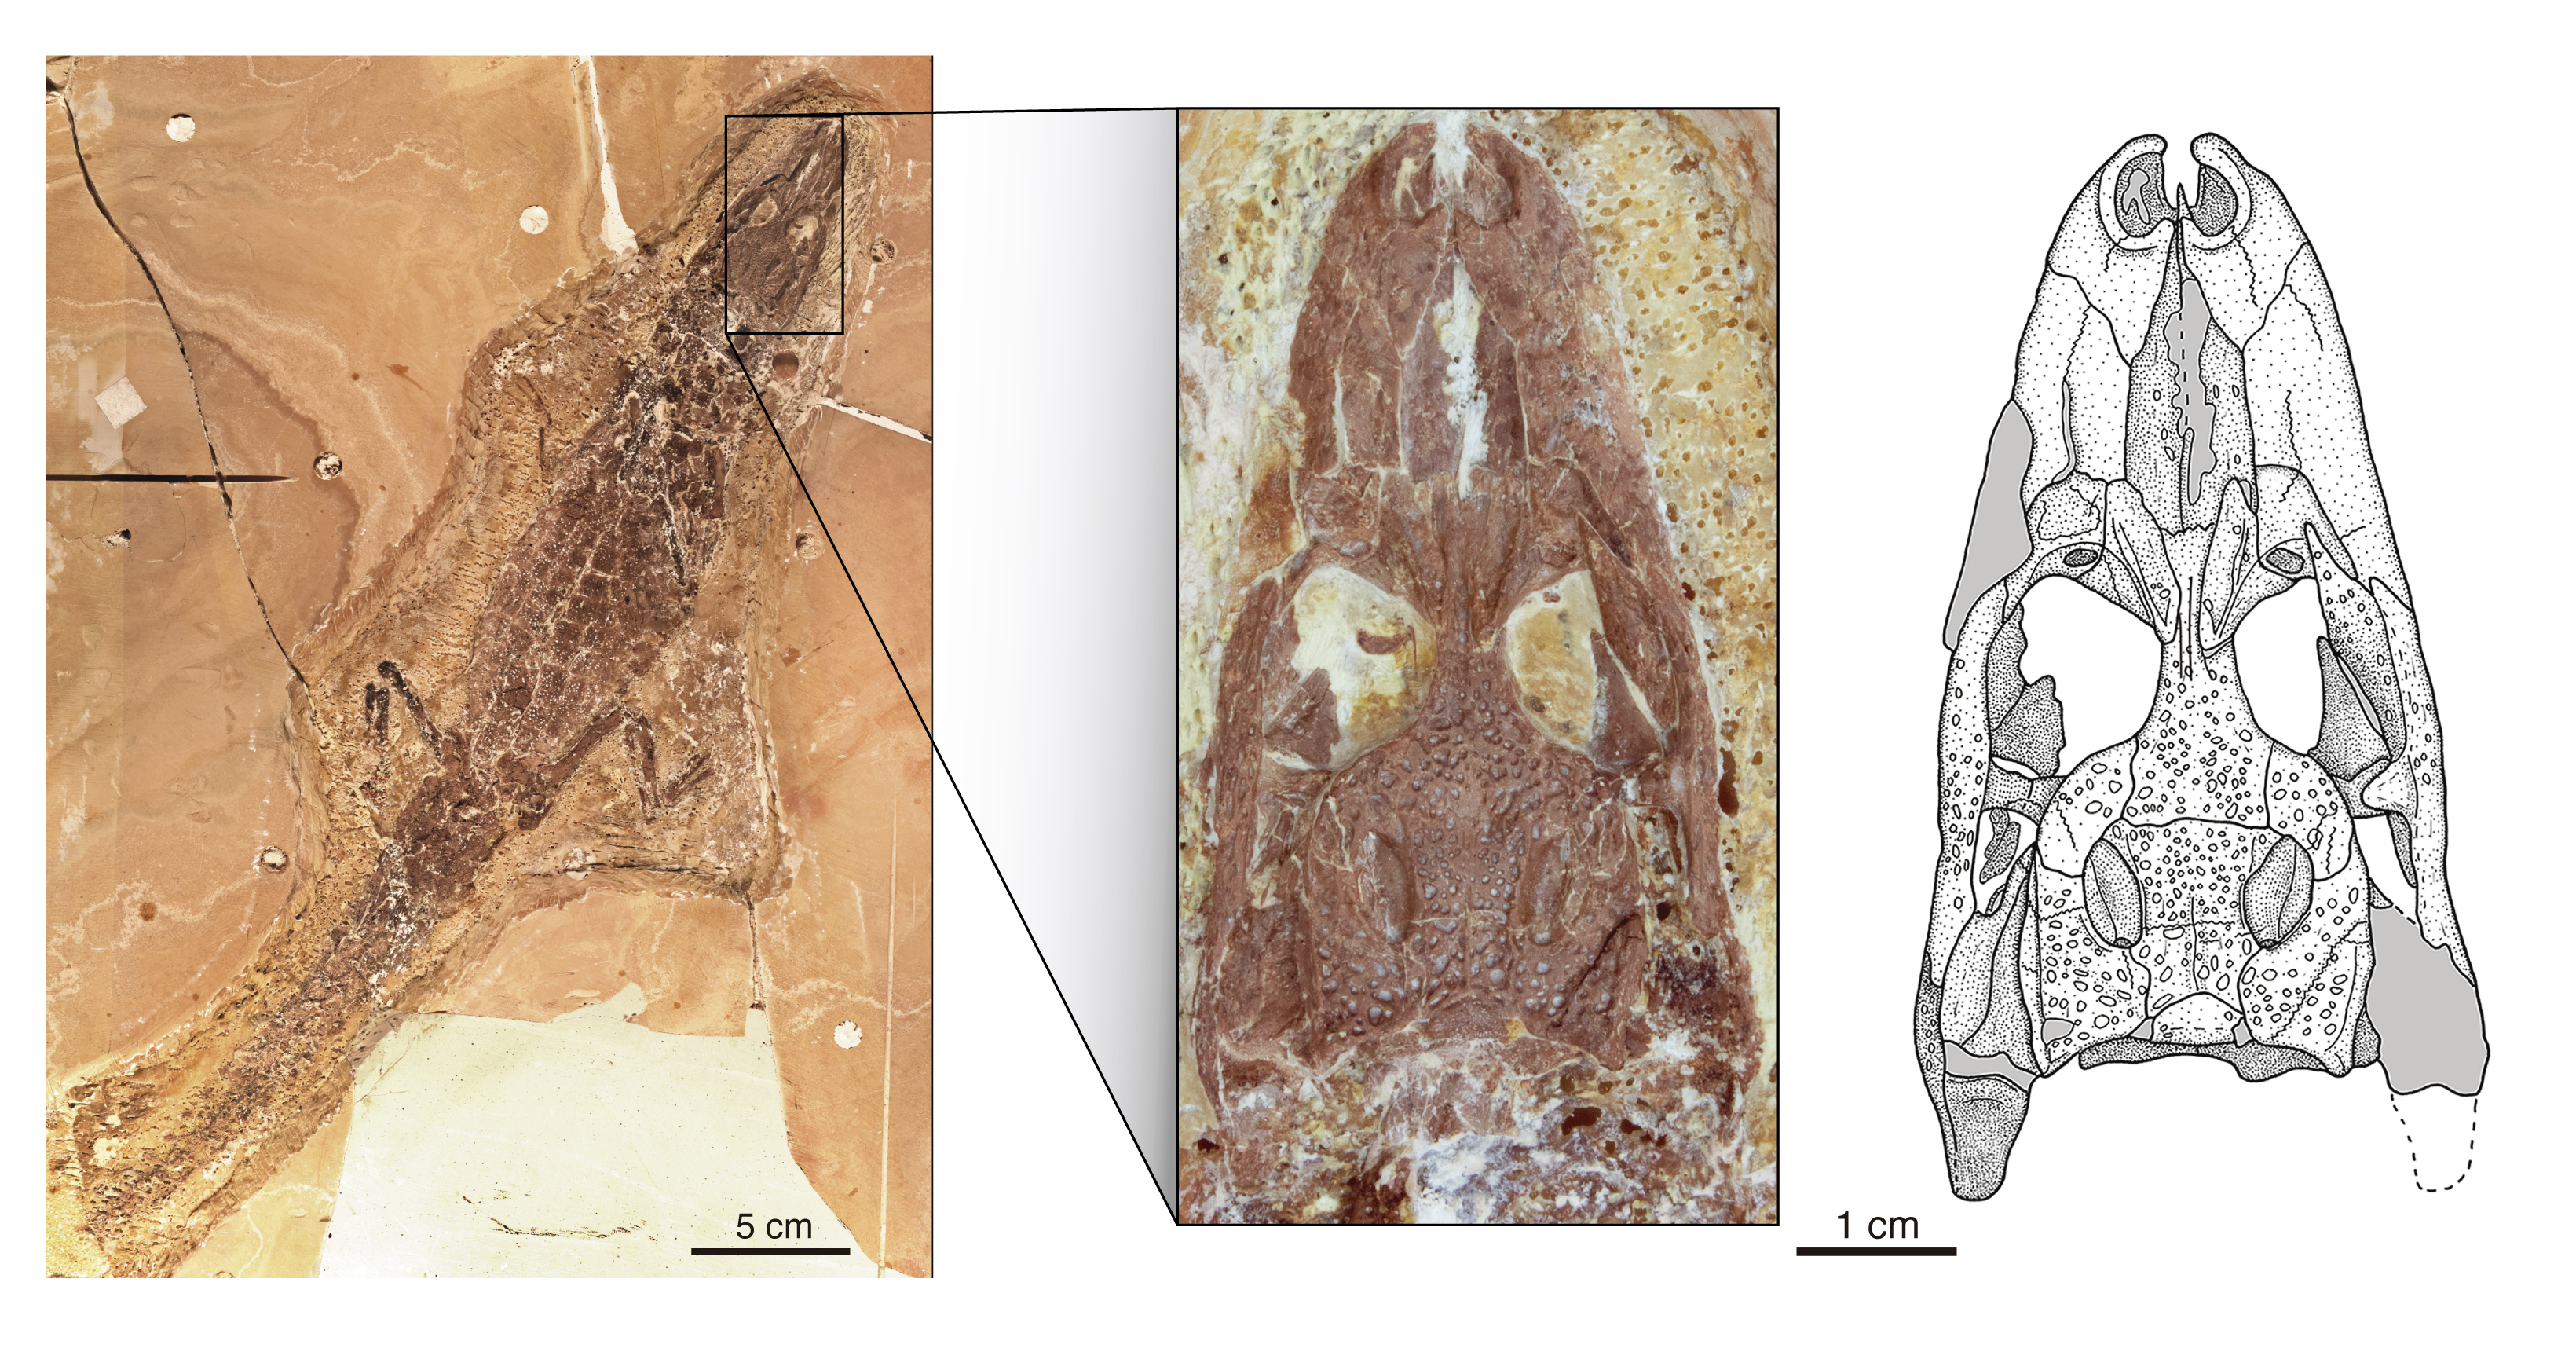 Skeleton and skull (enlargement) of one of the rare finds of Tsoabichi greenriverensis, an early caiman crocodile, from the approximately 52 million-year-old rocks of the Green River Formation in Wyoming, USA.